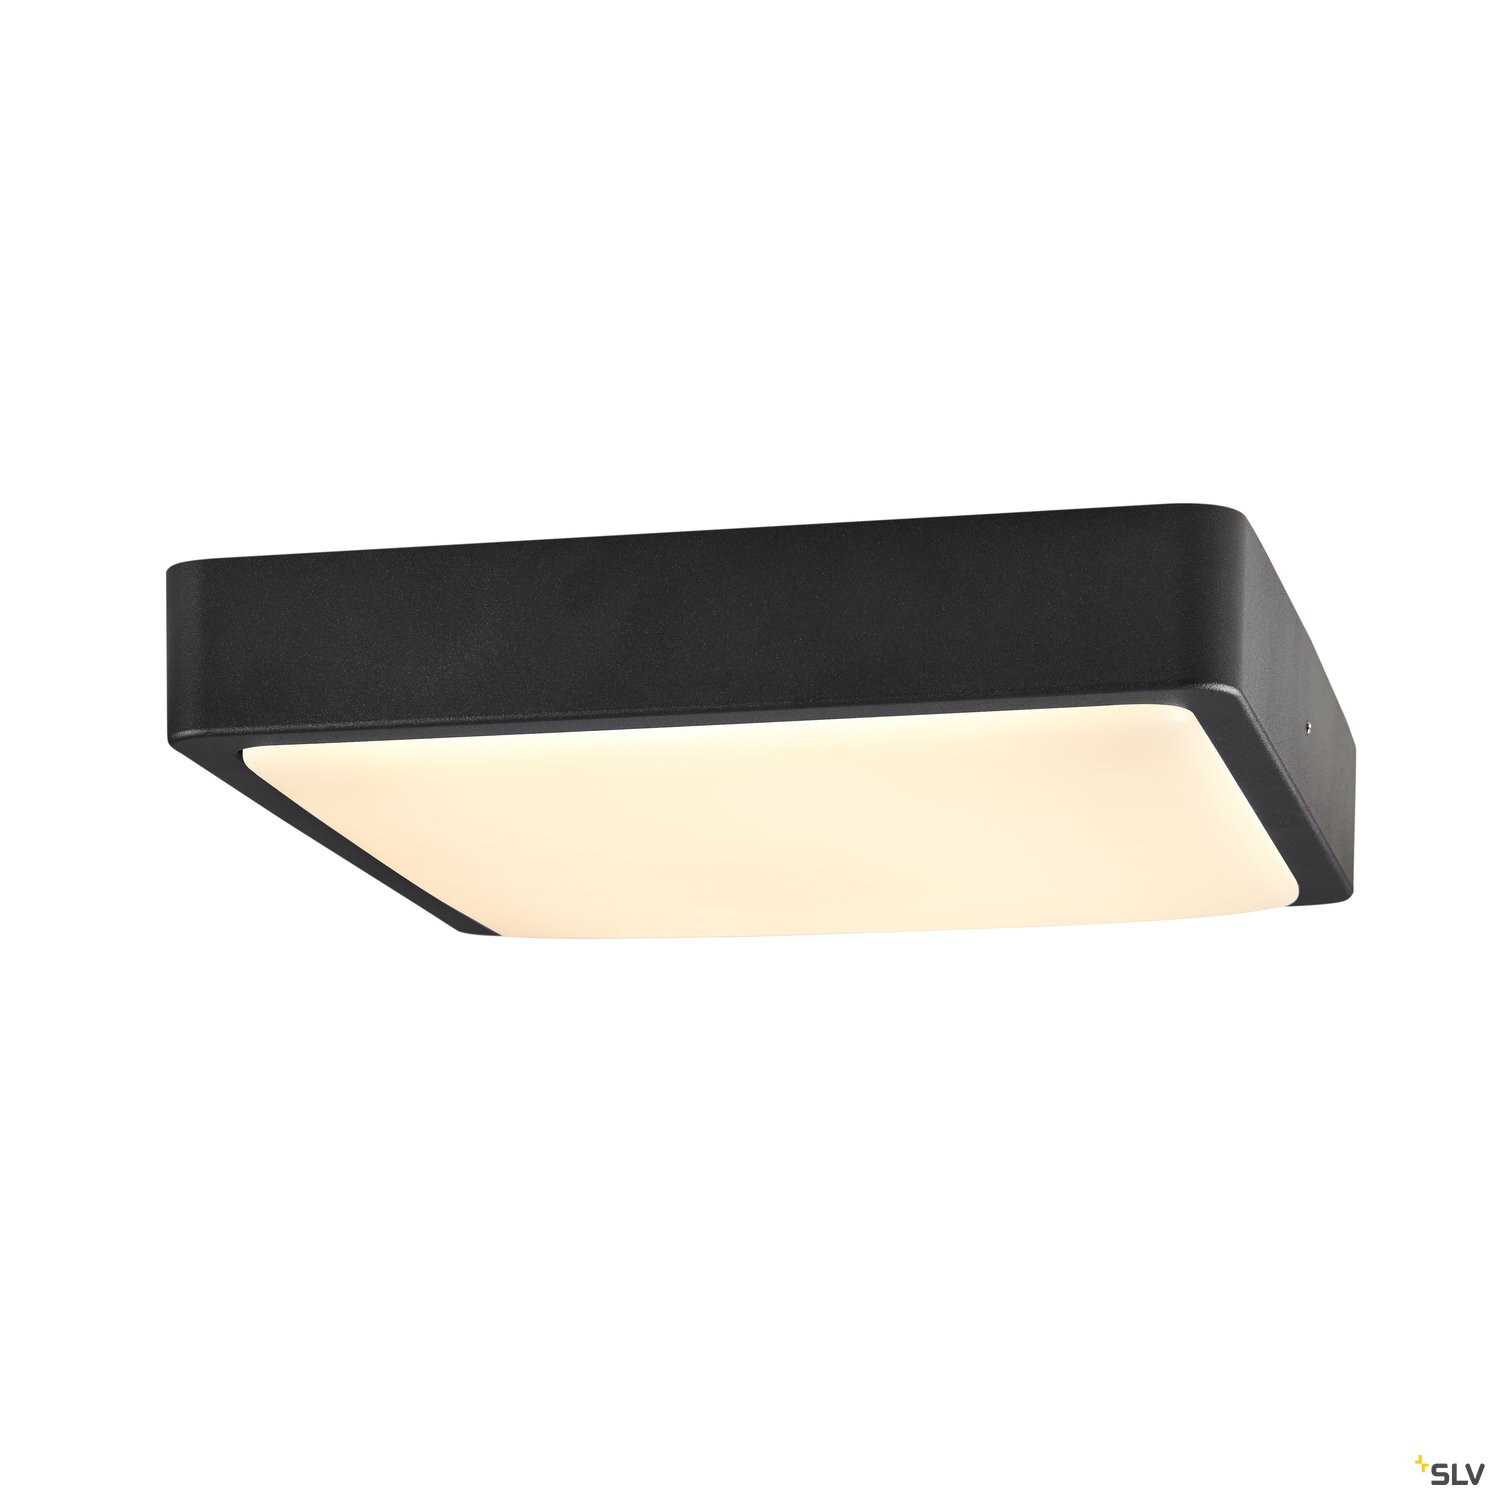 SLV LED Ceiling Light AINOS SQUARE, 3000/4000K, with Motion Detector, square, anthracite, IP65 1300lm